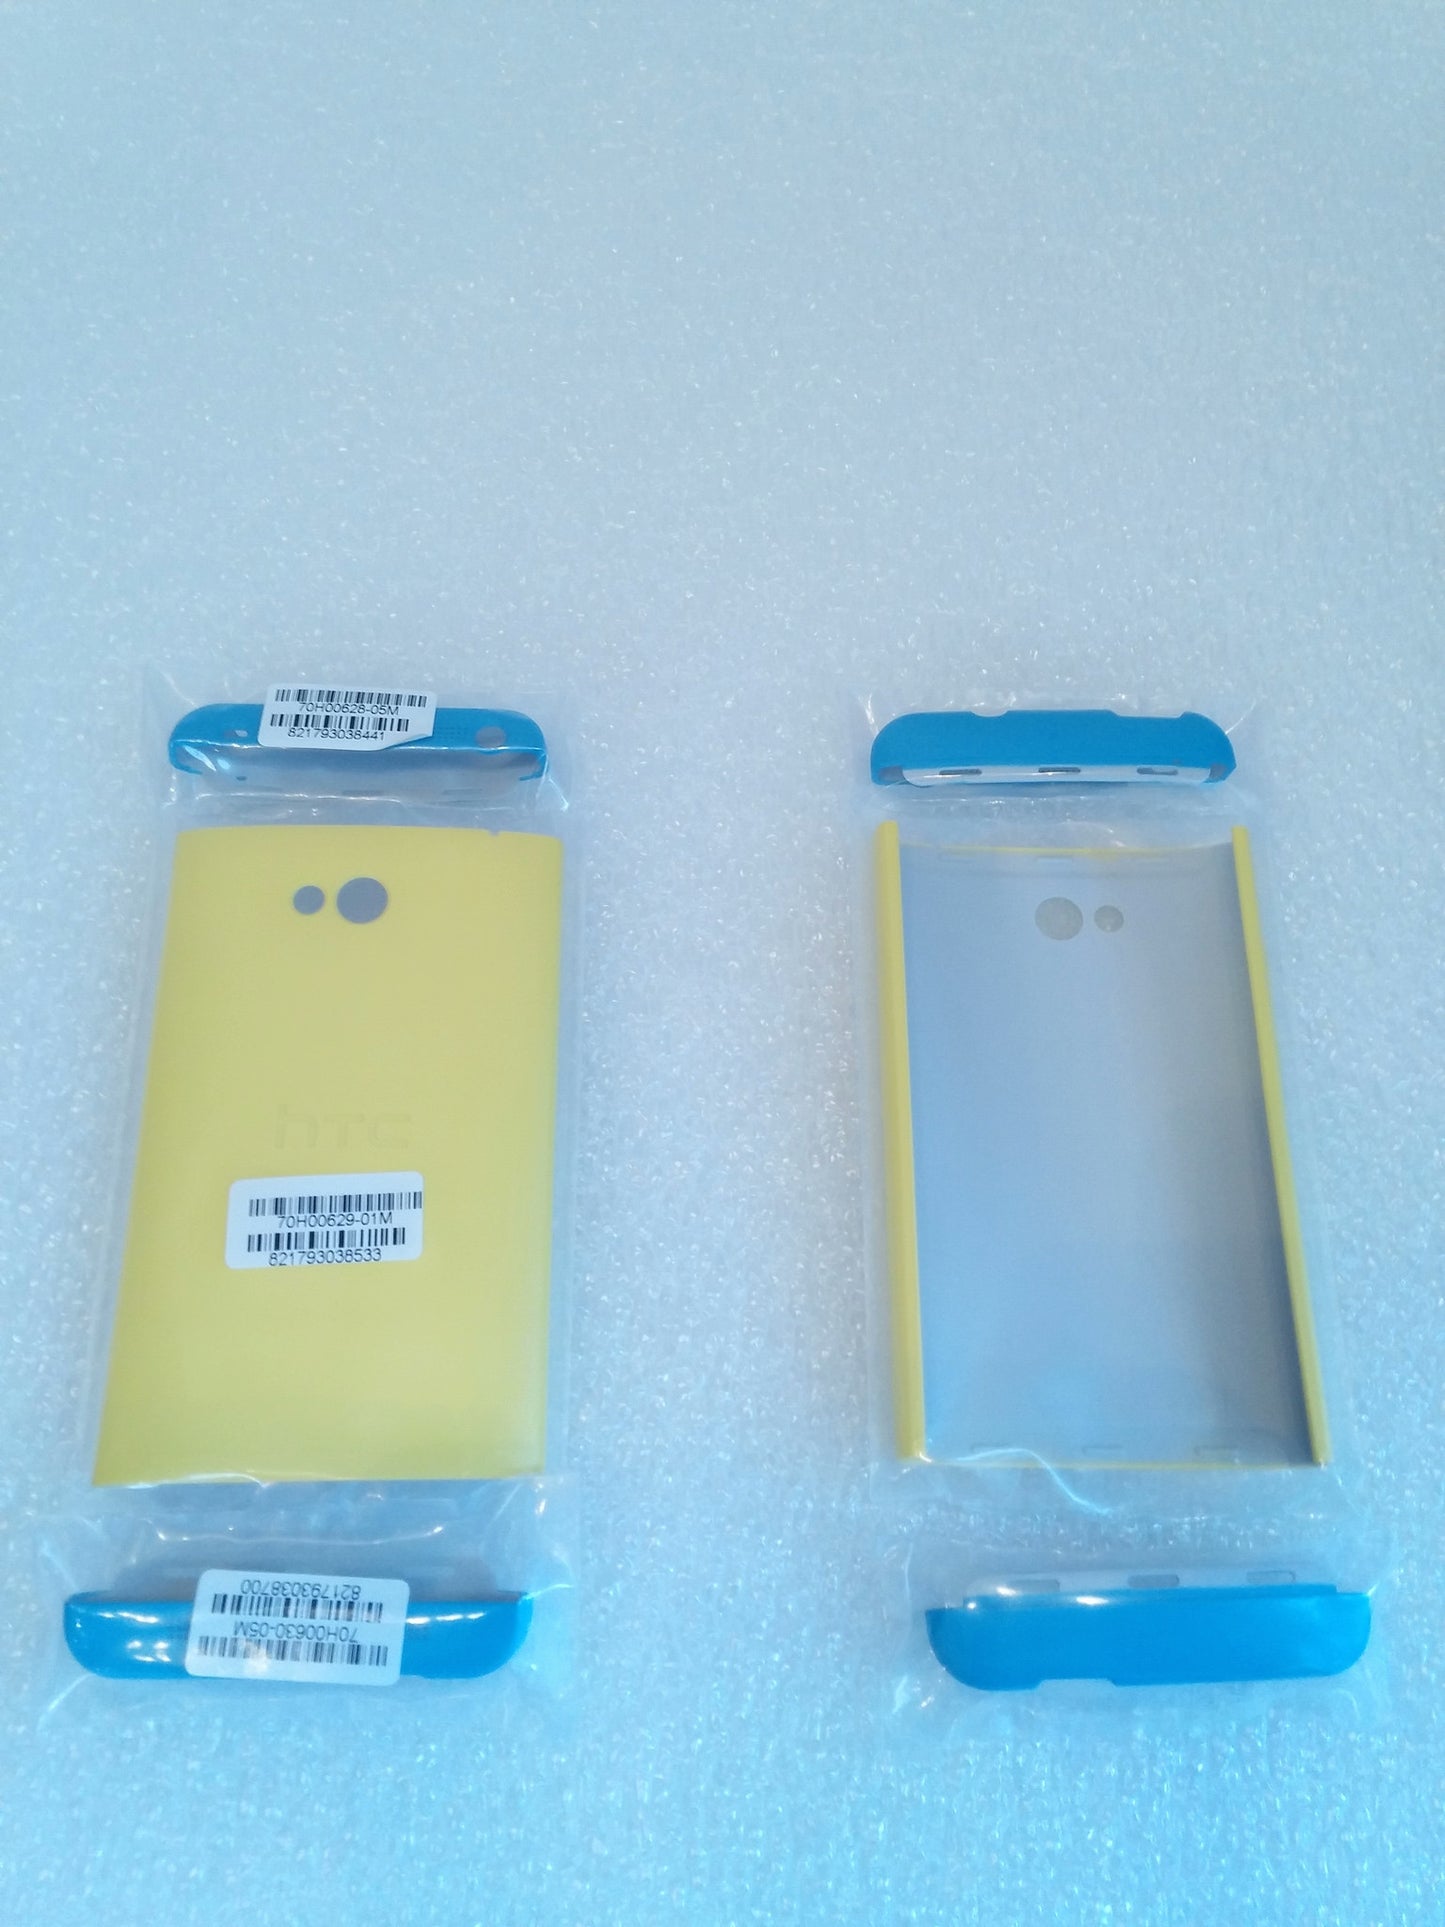 New Tri-color Double Dip Hard Plastic Case Cover For HTC ONE M7 Blue/Yellow/Blue - Original - worldtradesolution.com
 - 2